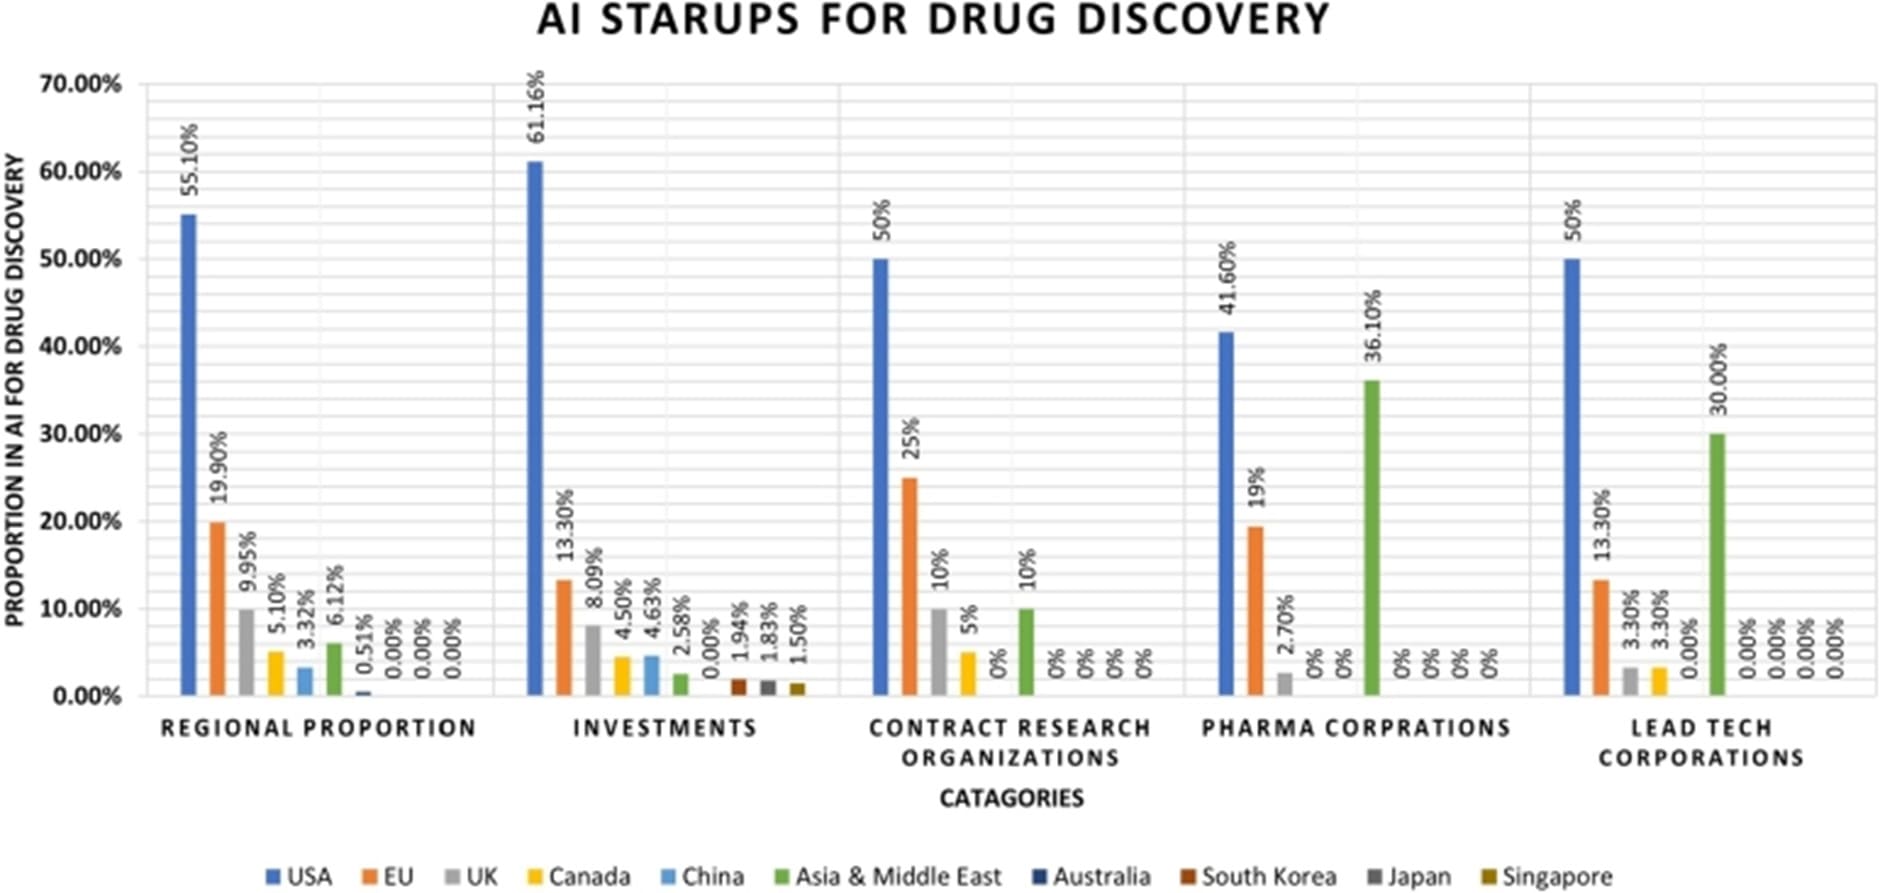 AI startups for drug discovery trends